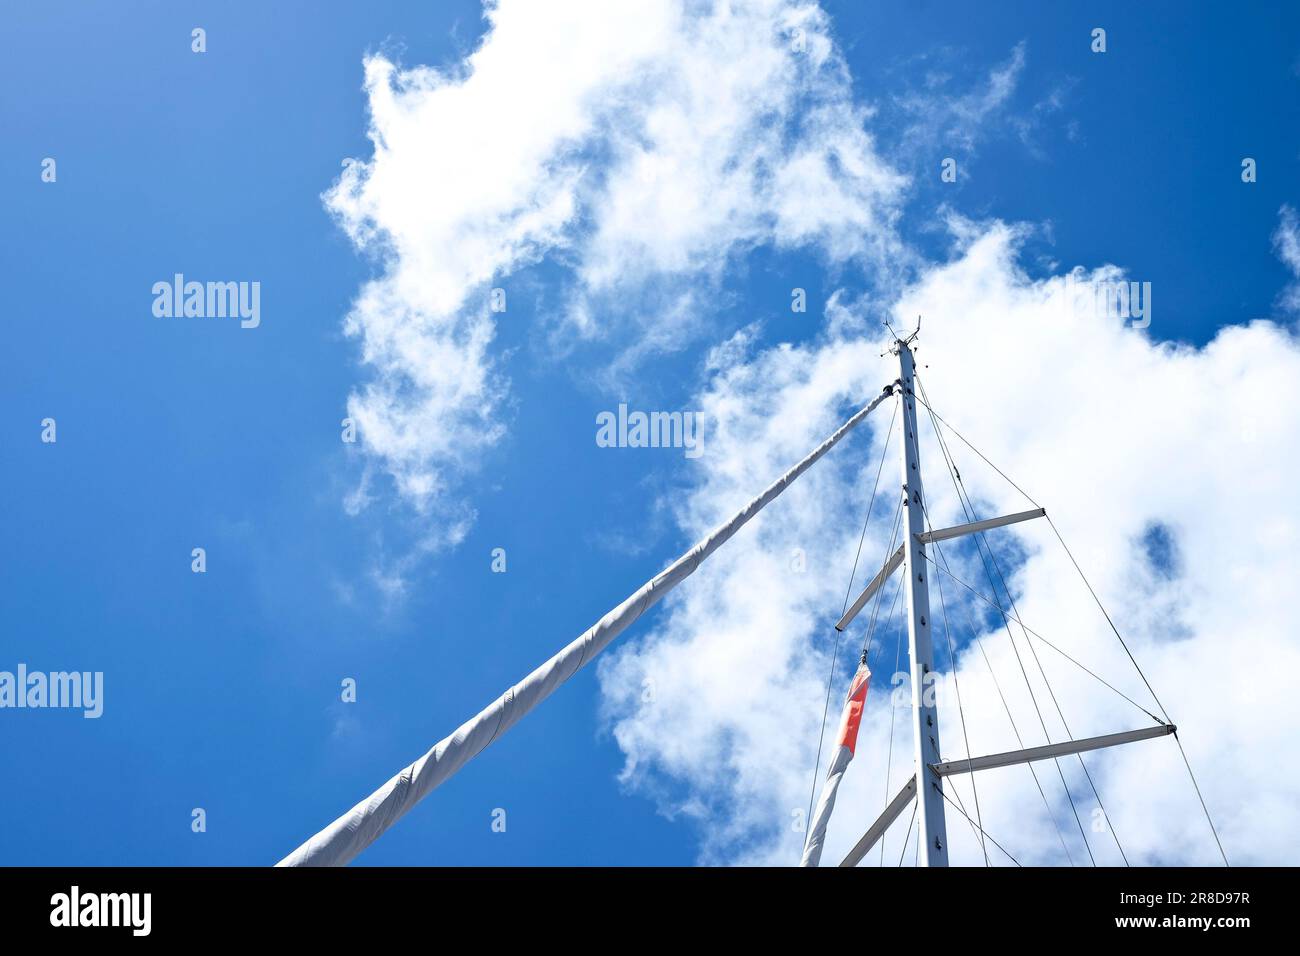 a mast of a sailboat with blue sky and white clouds Stock Photo